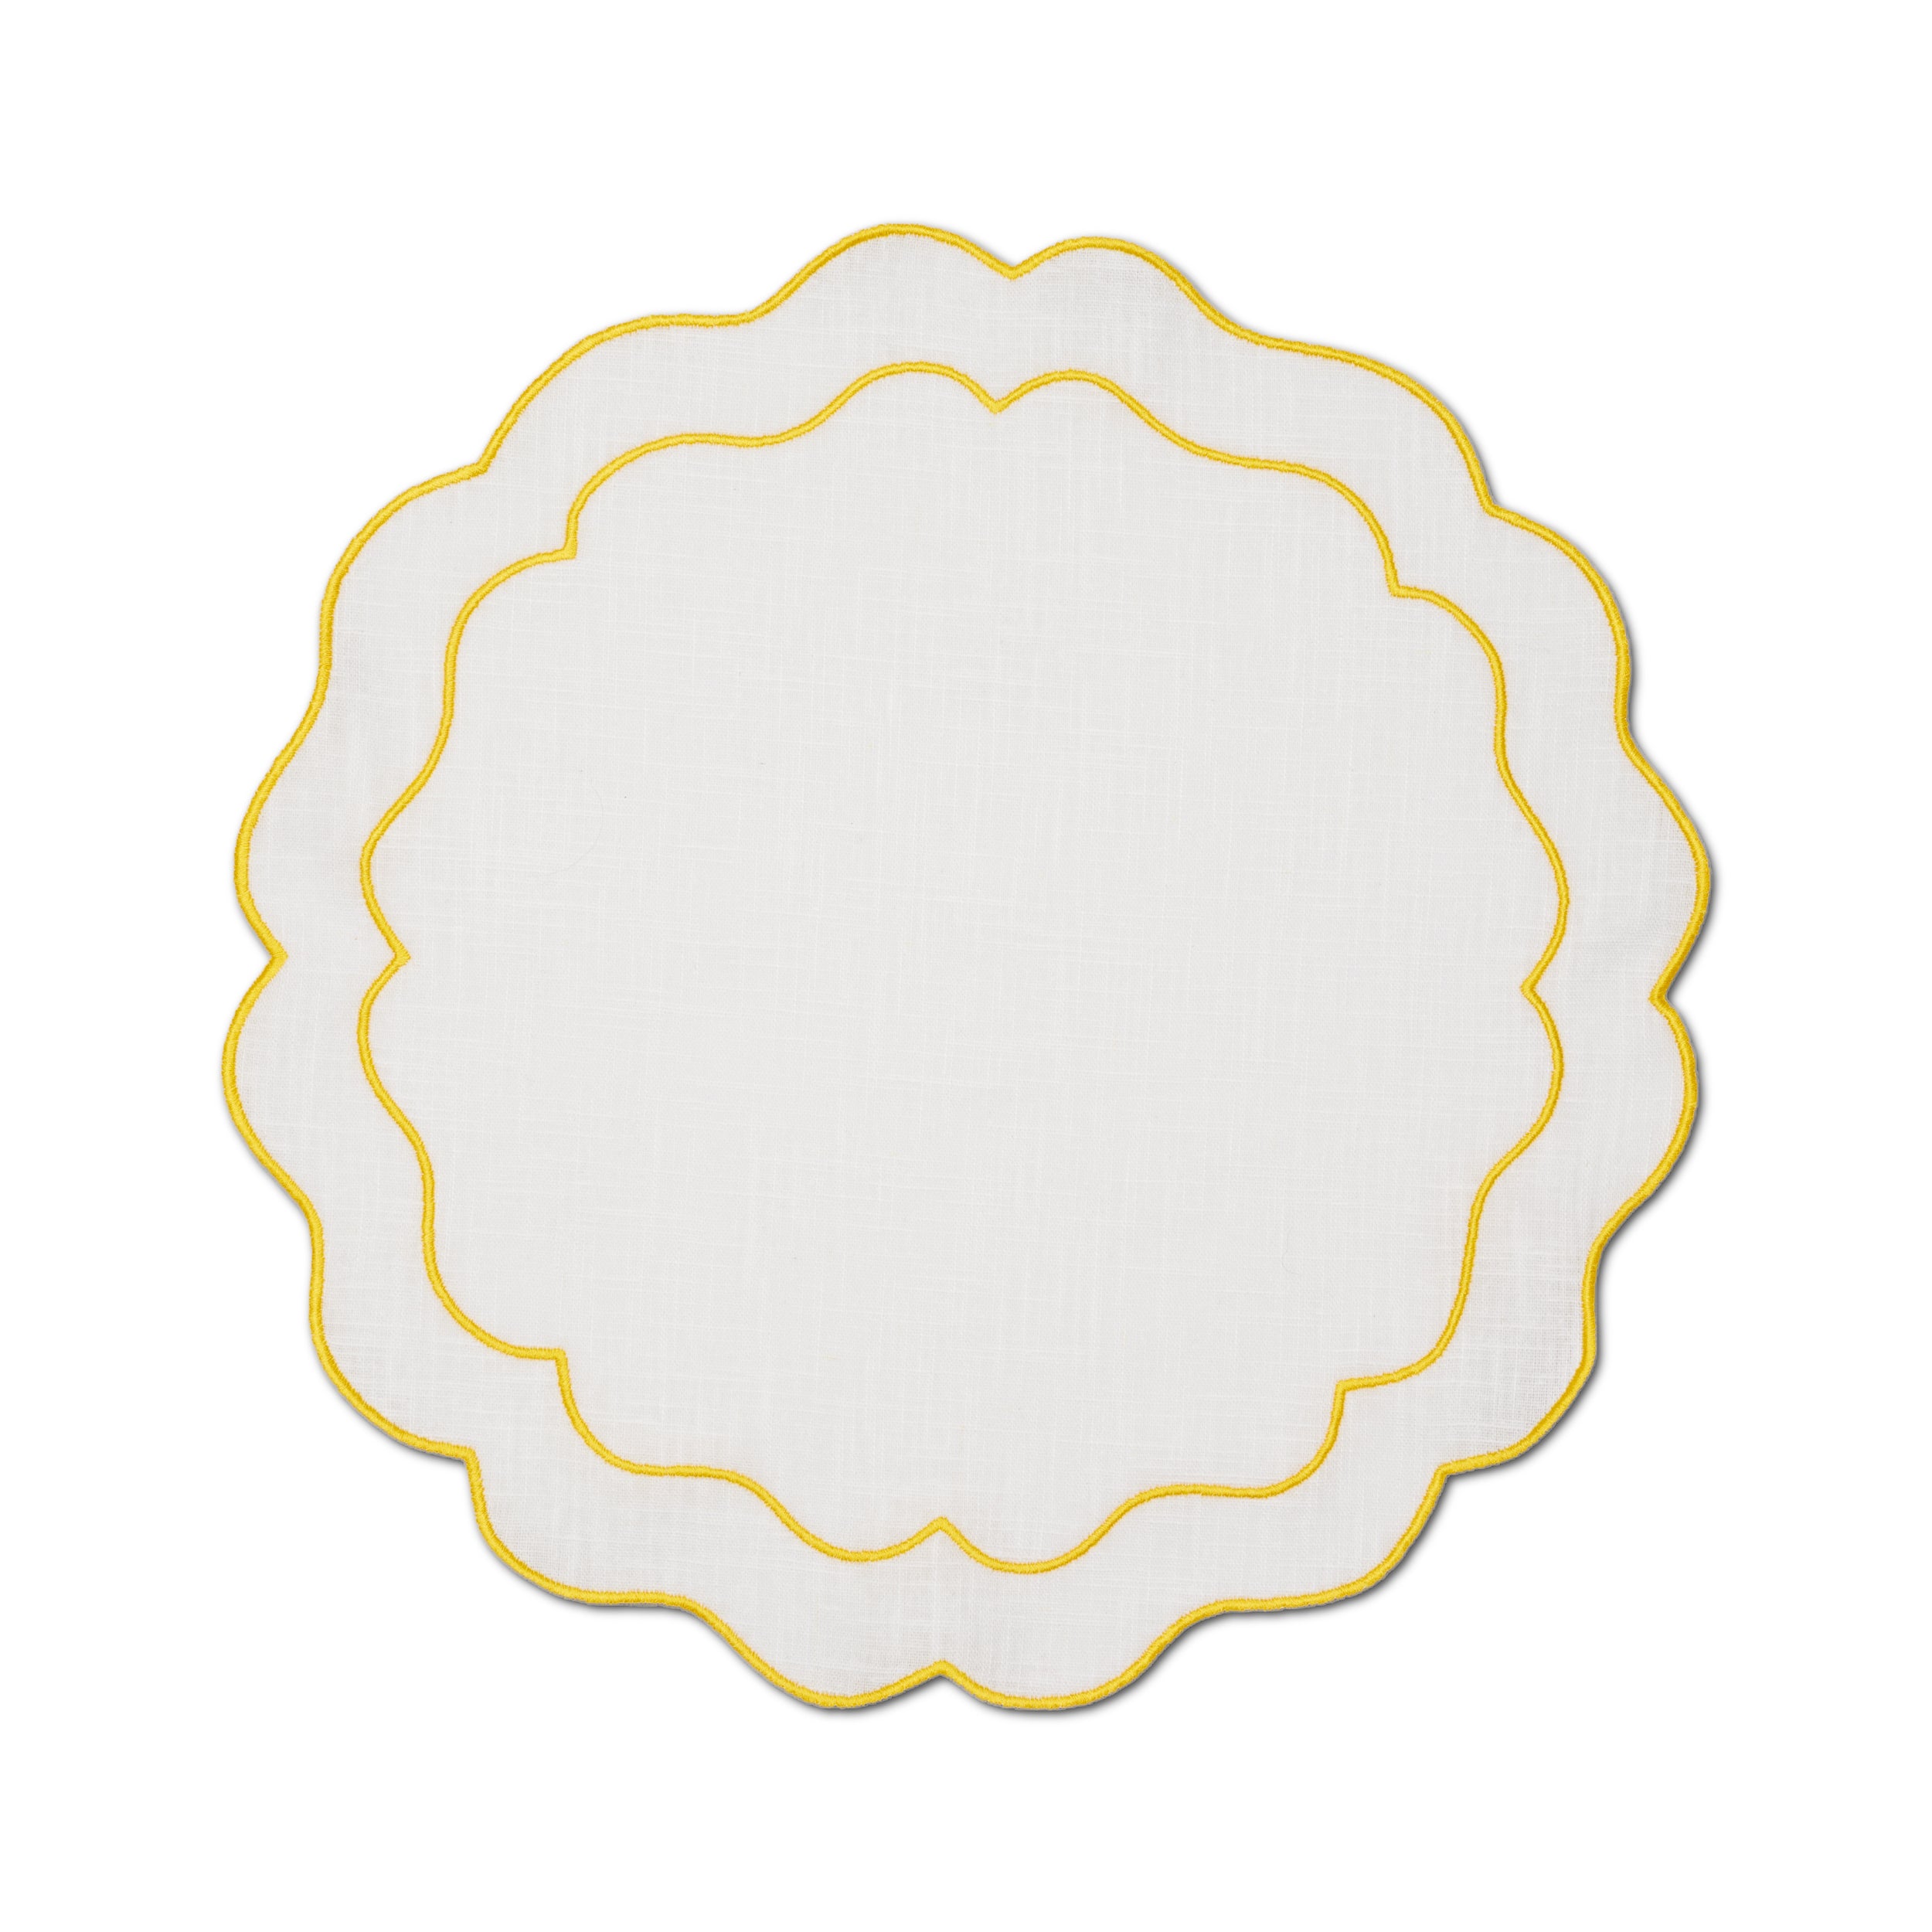 Seafolly Placemat | White with Yellow - set of 4